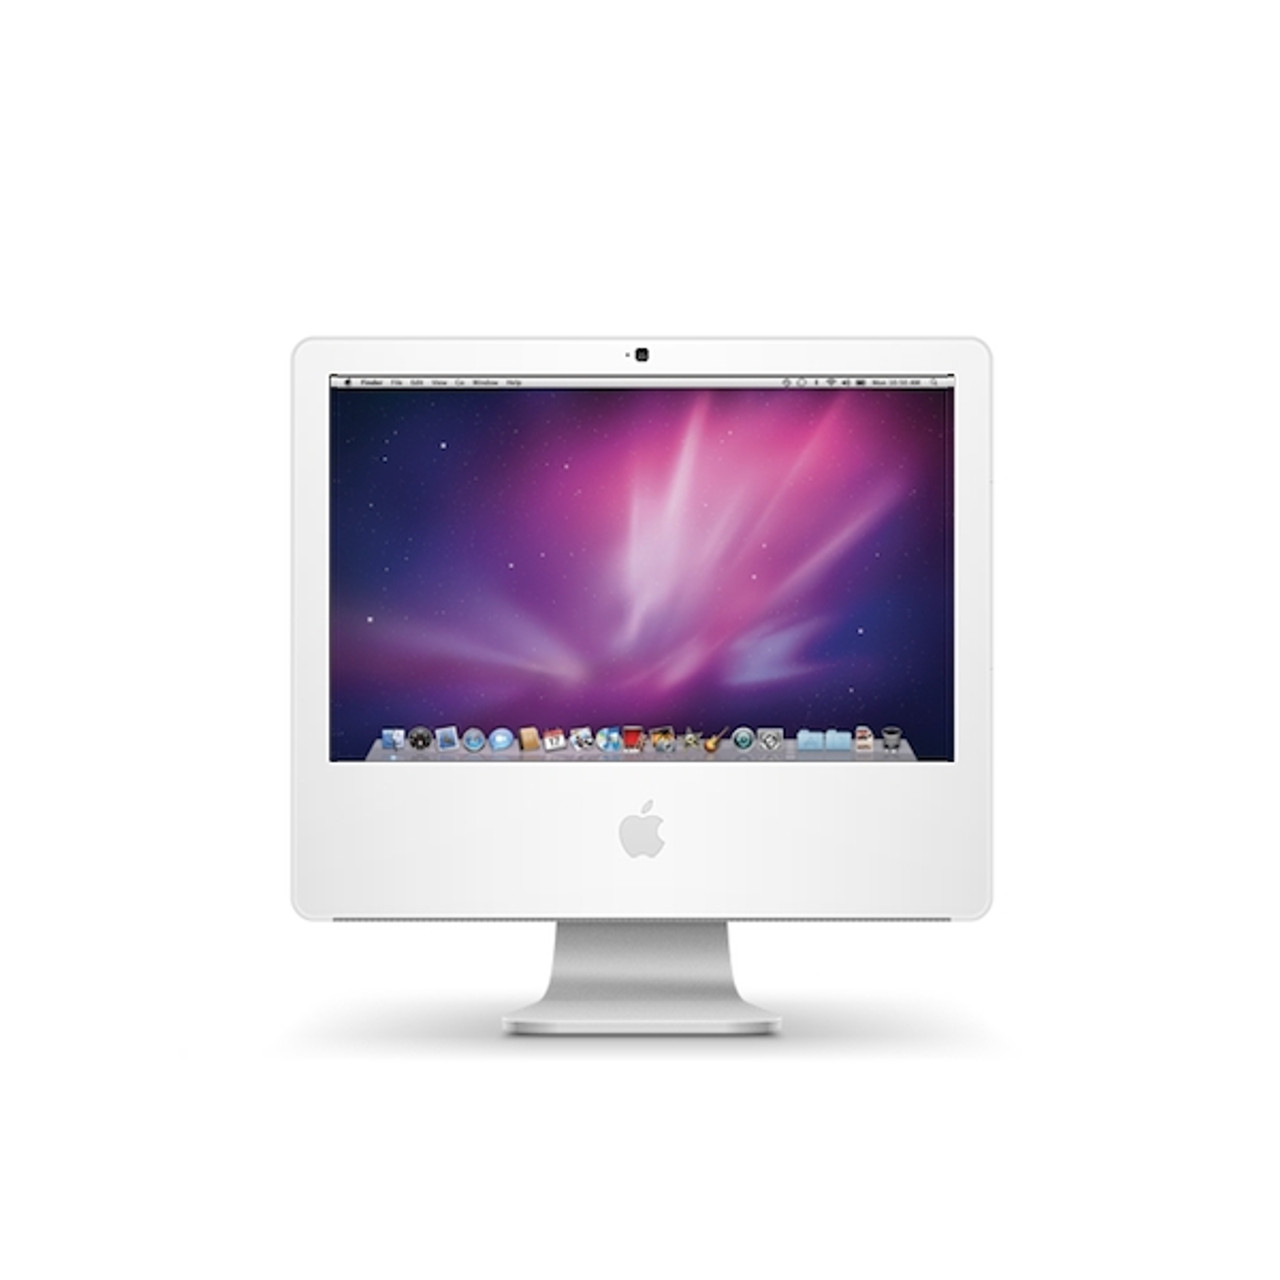 Apple iMac 24-inch, Mid 2007 - 2.8GHz Core 2 Extreme  AIO